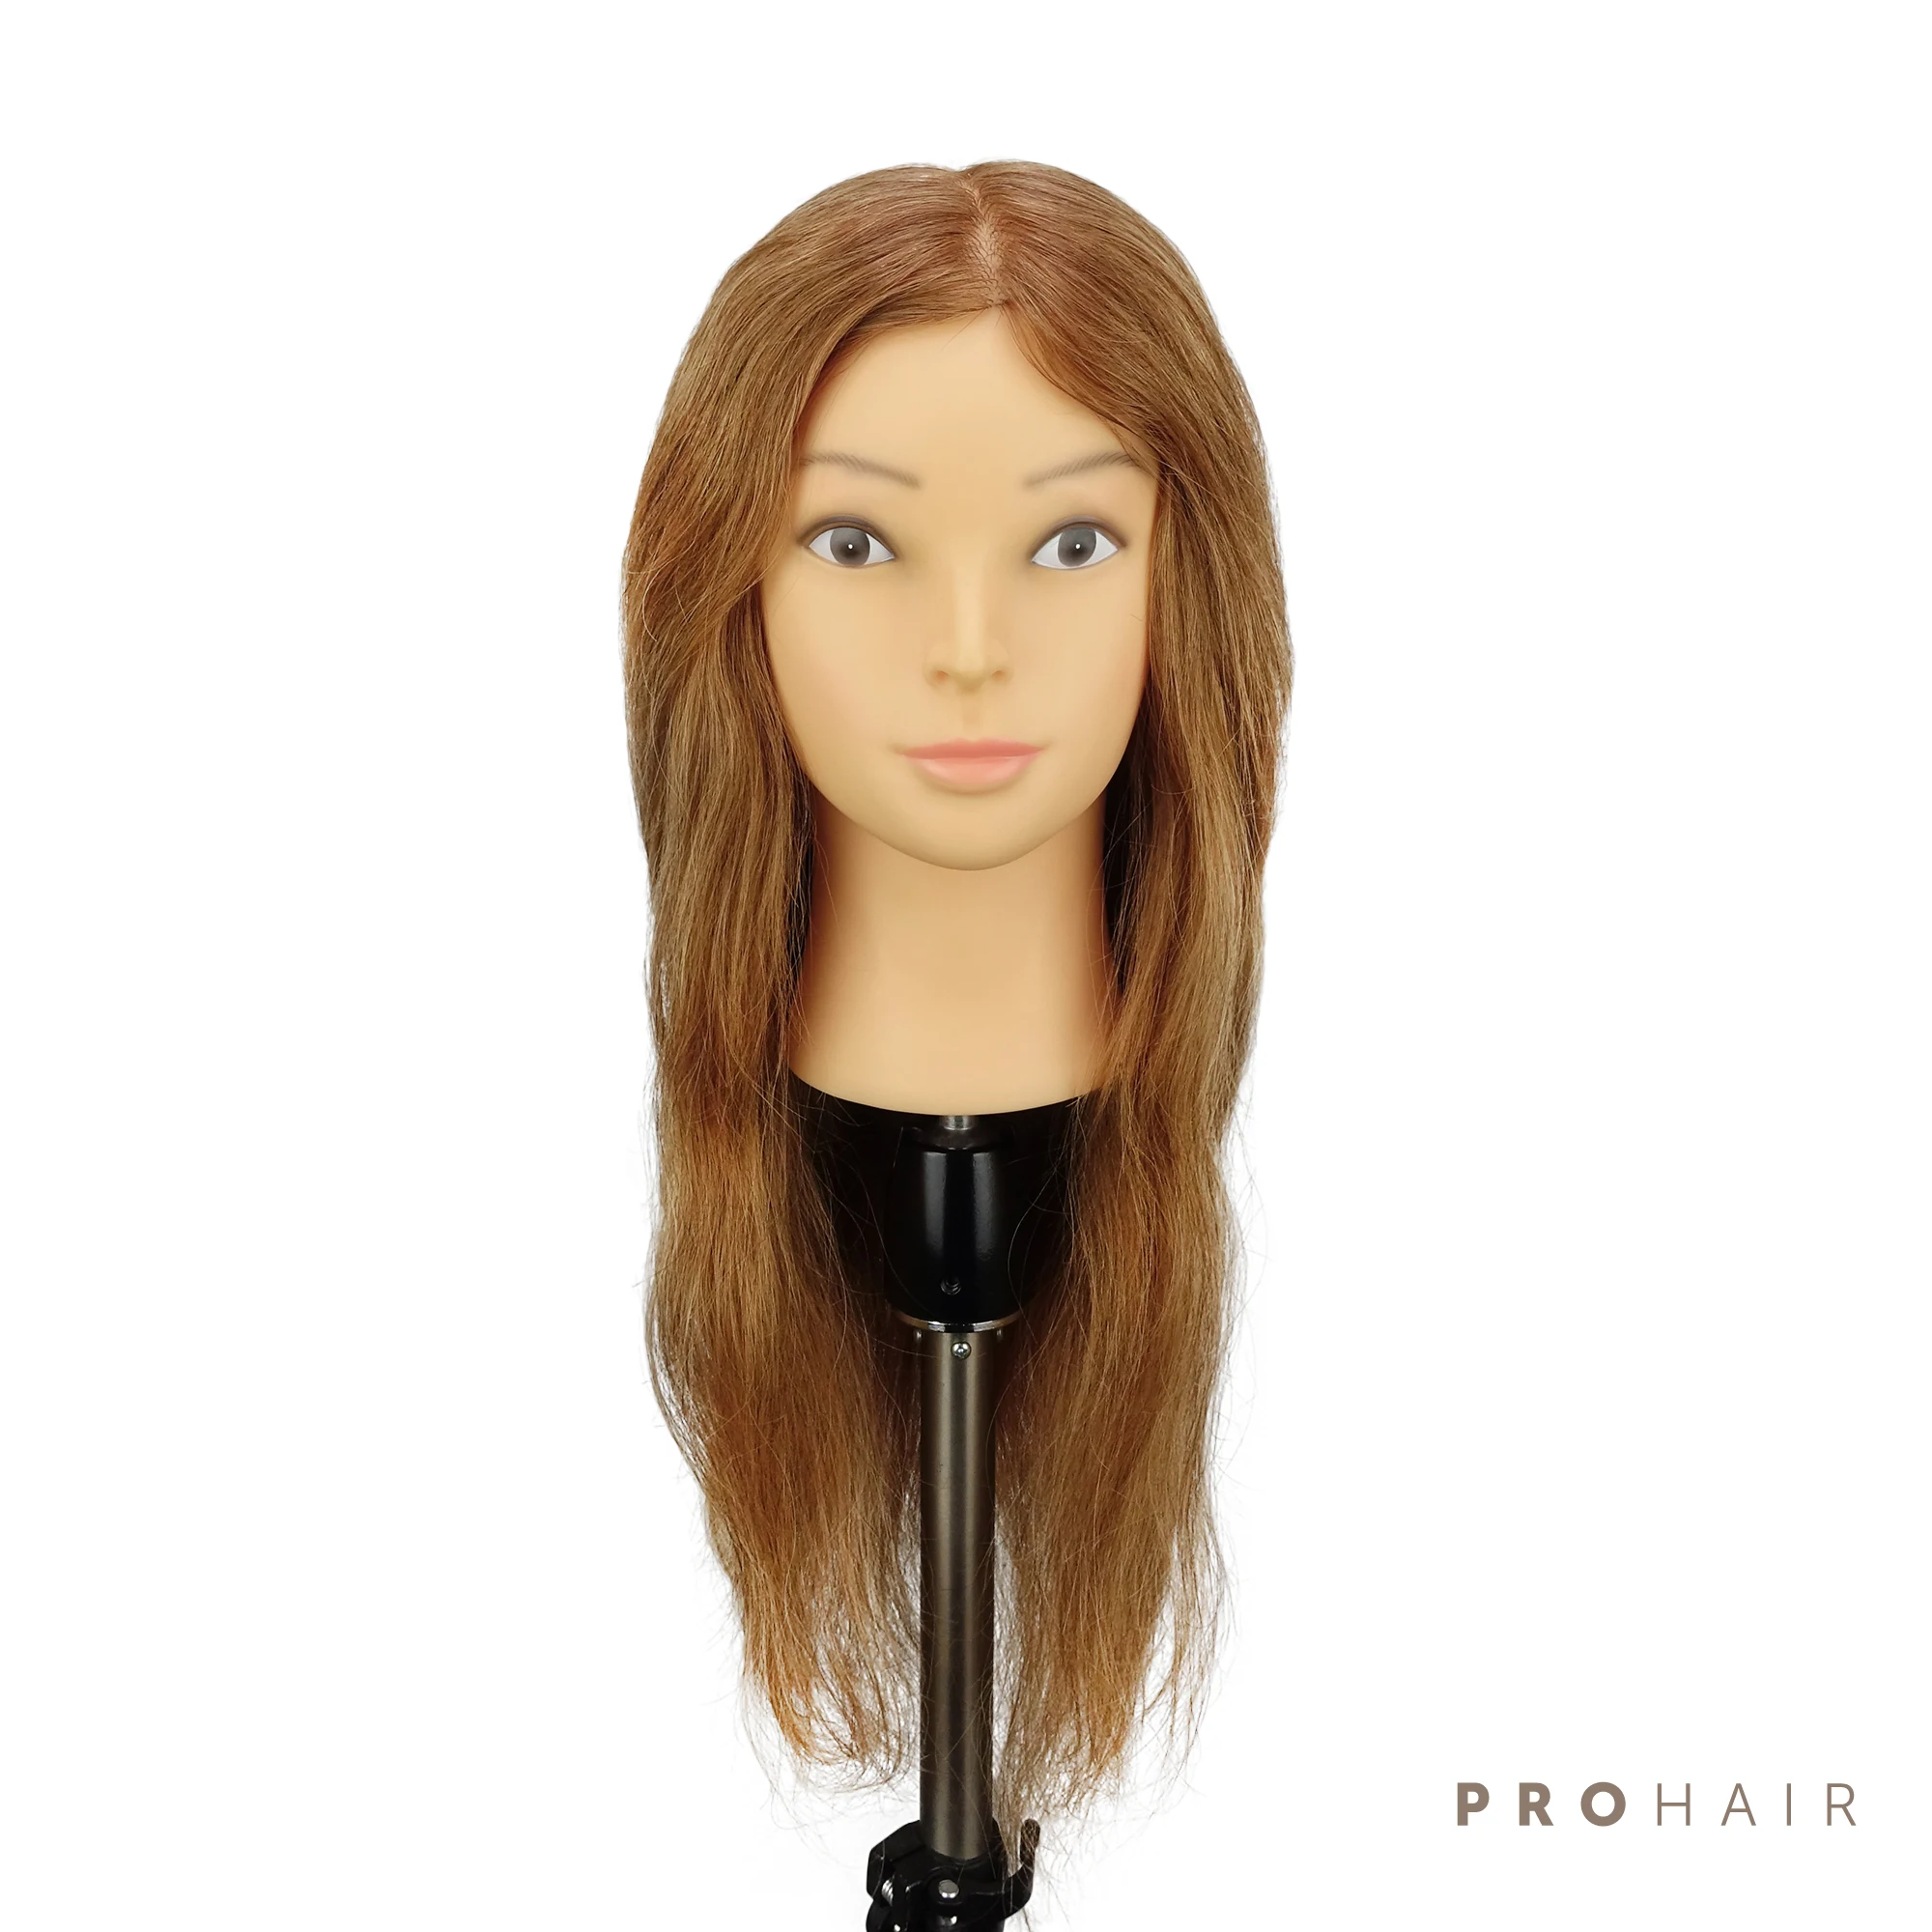 Mannequin-Head with 50CM 100% Human Hair  Blond Training Head Female Mannequin Training Doll Head Wig head